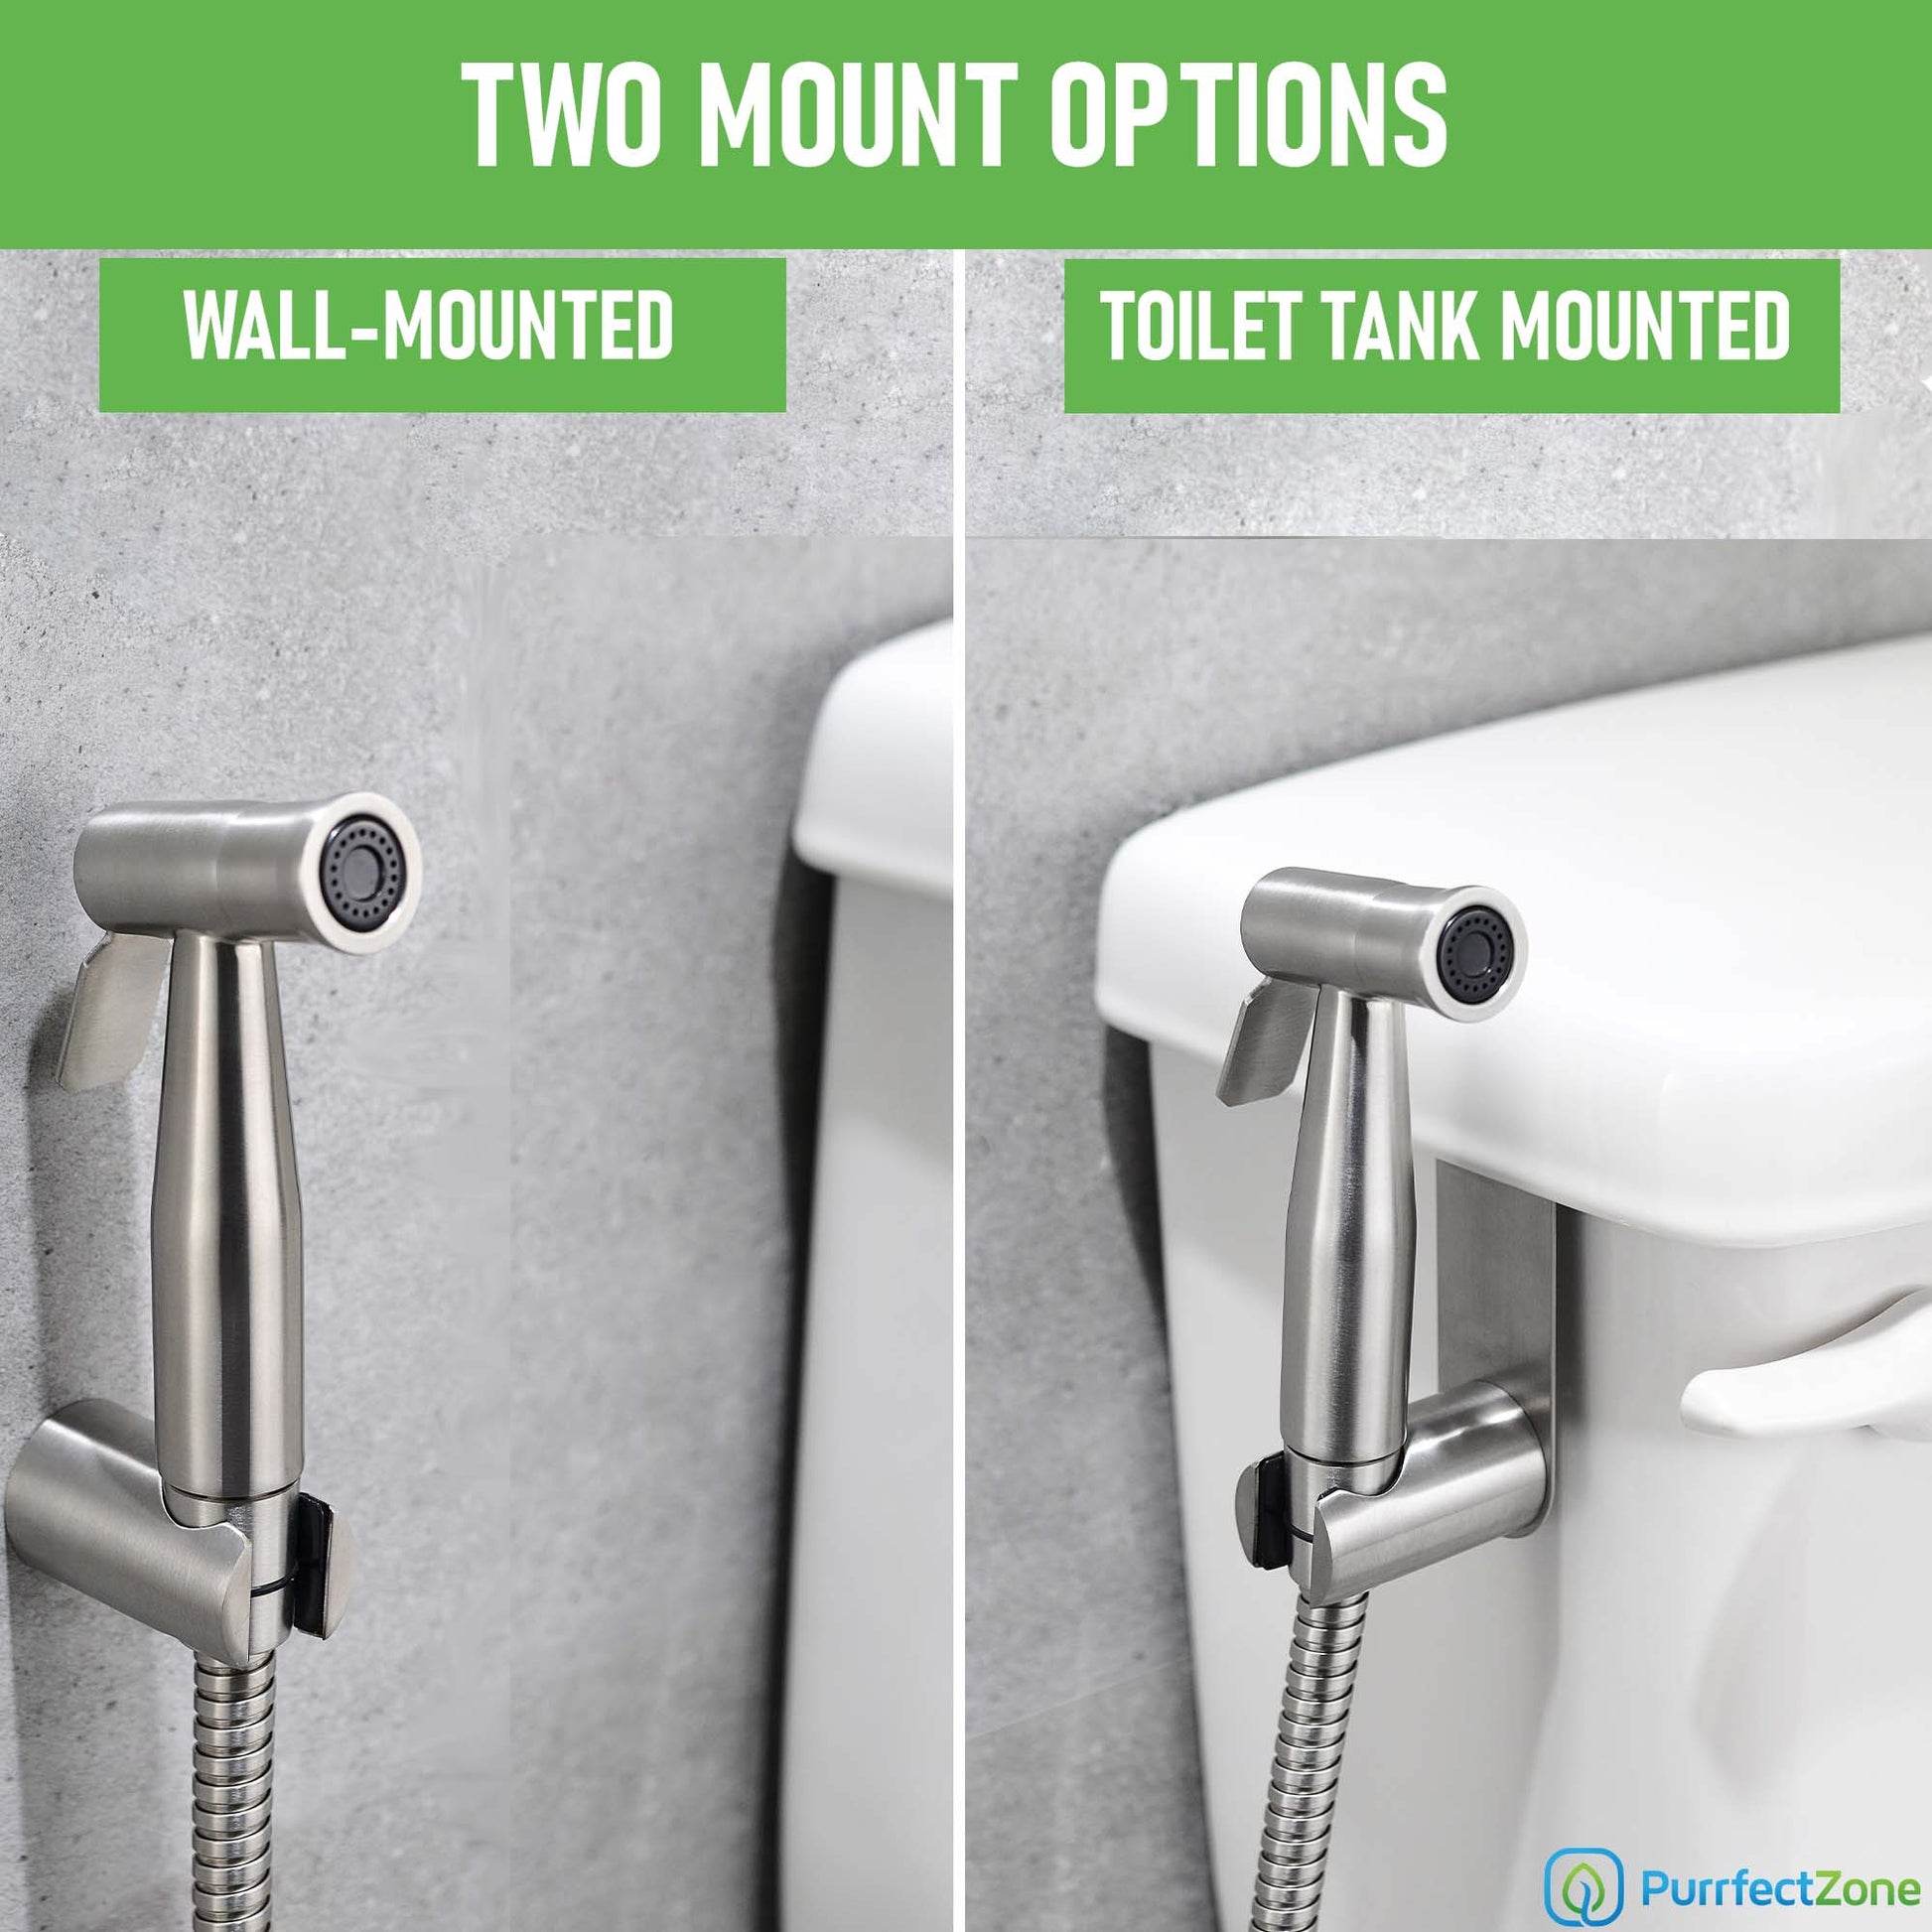 Wall mounted and toilet tank mounted